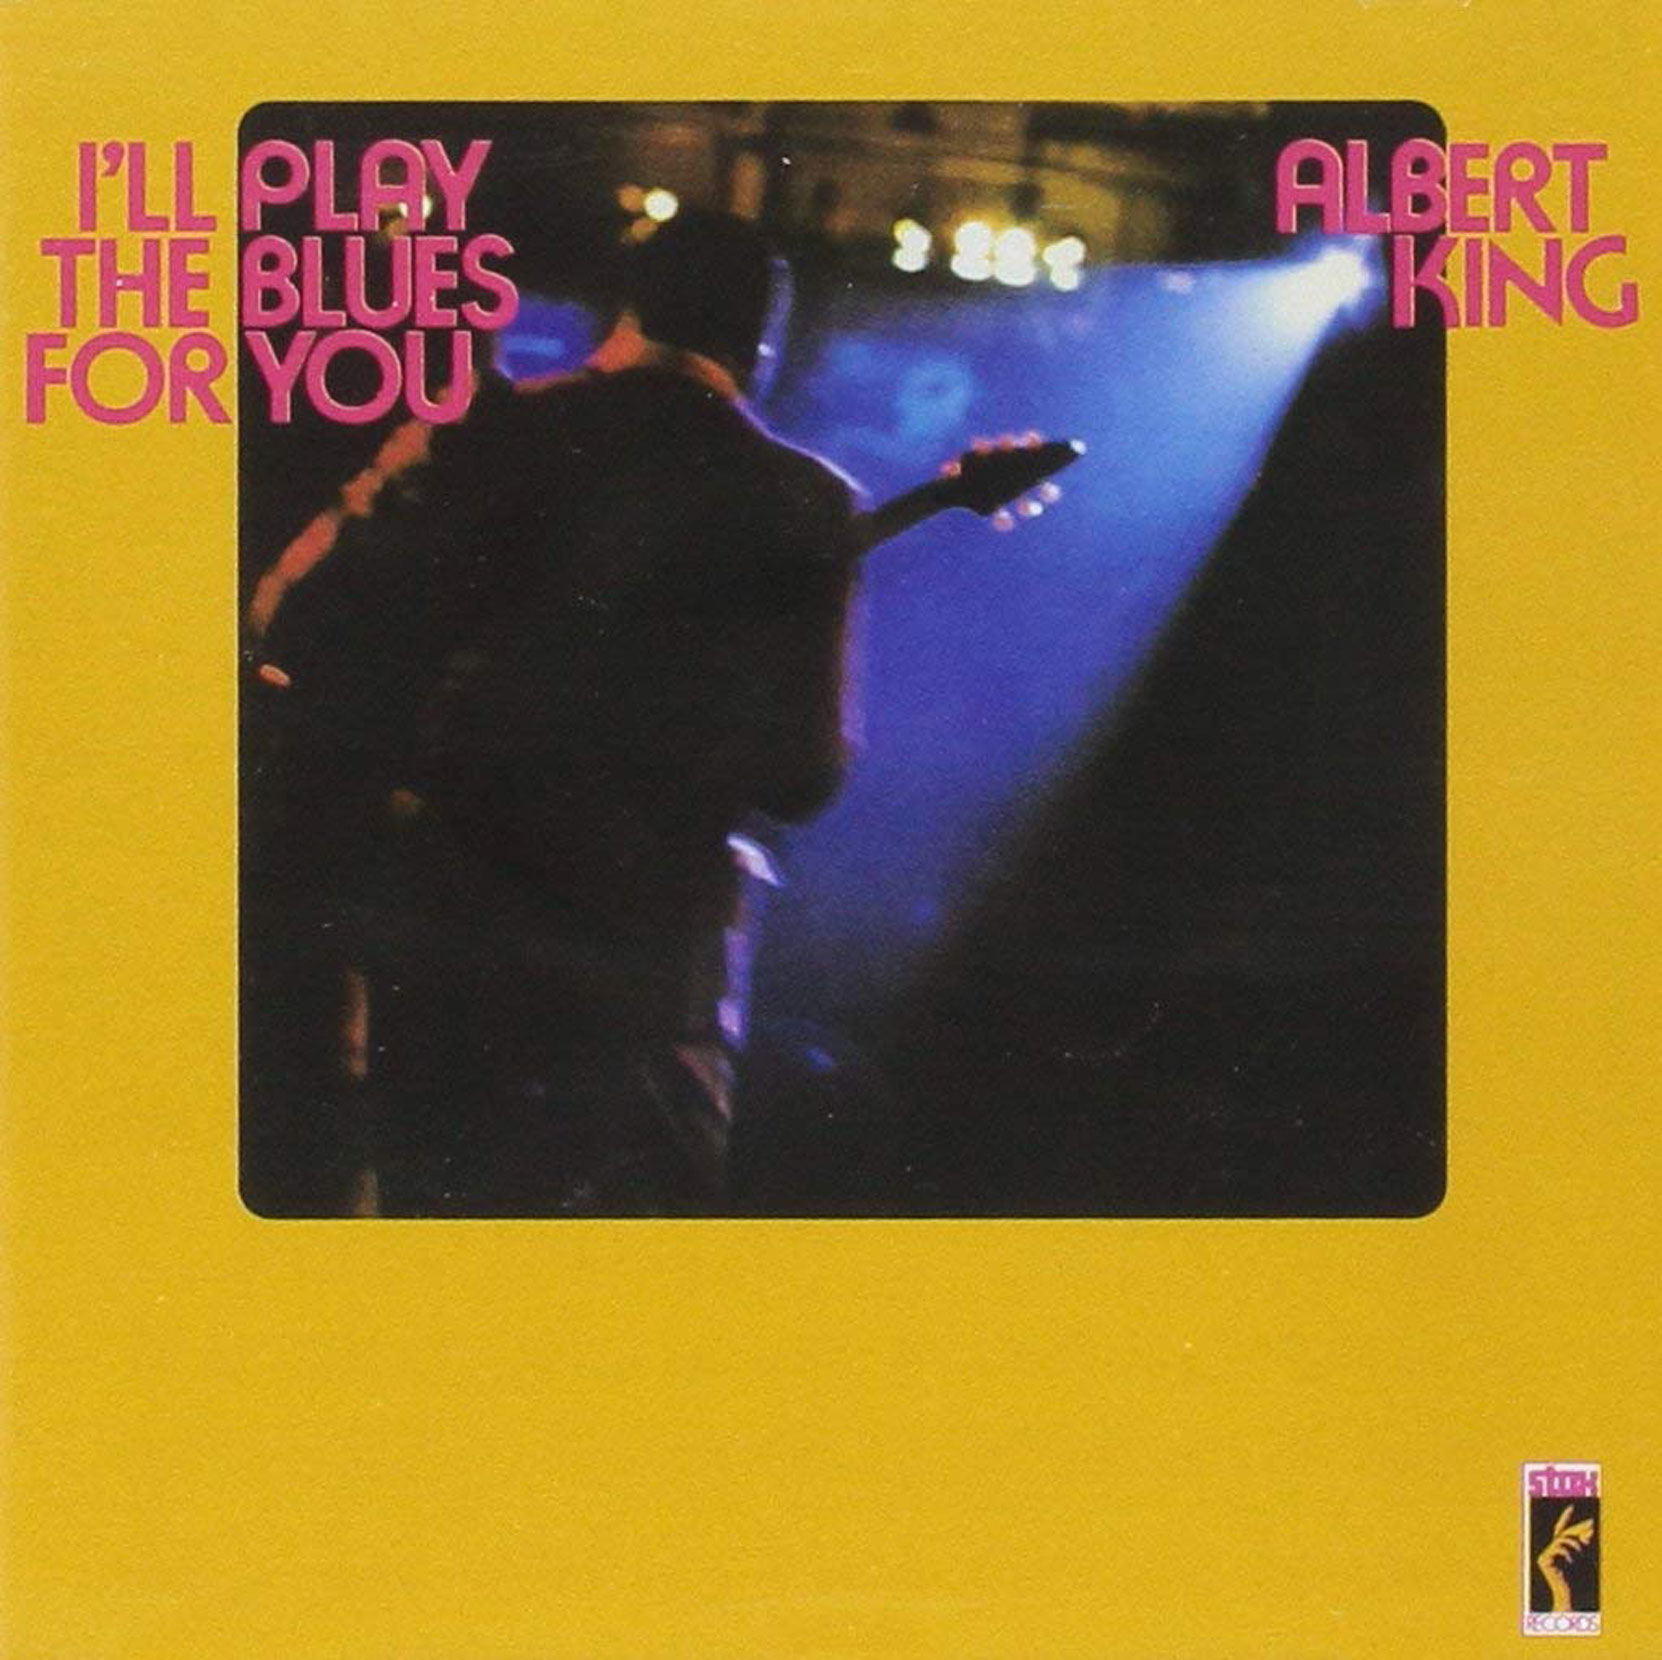 Albert King - I'll Play The Blues For You, released on Stax Records. CD cover.